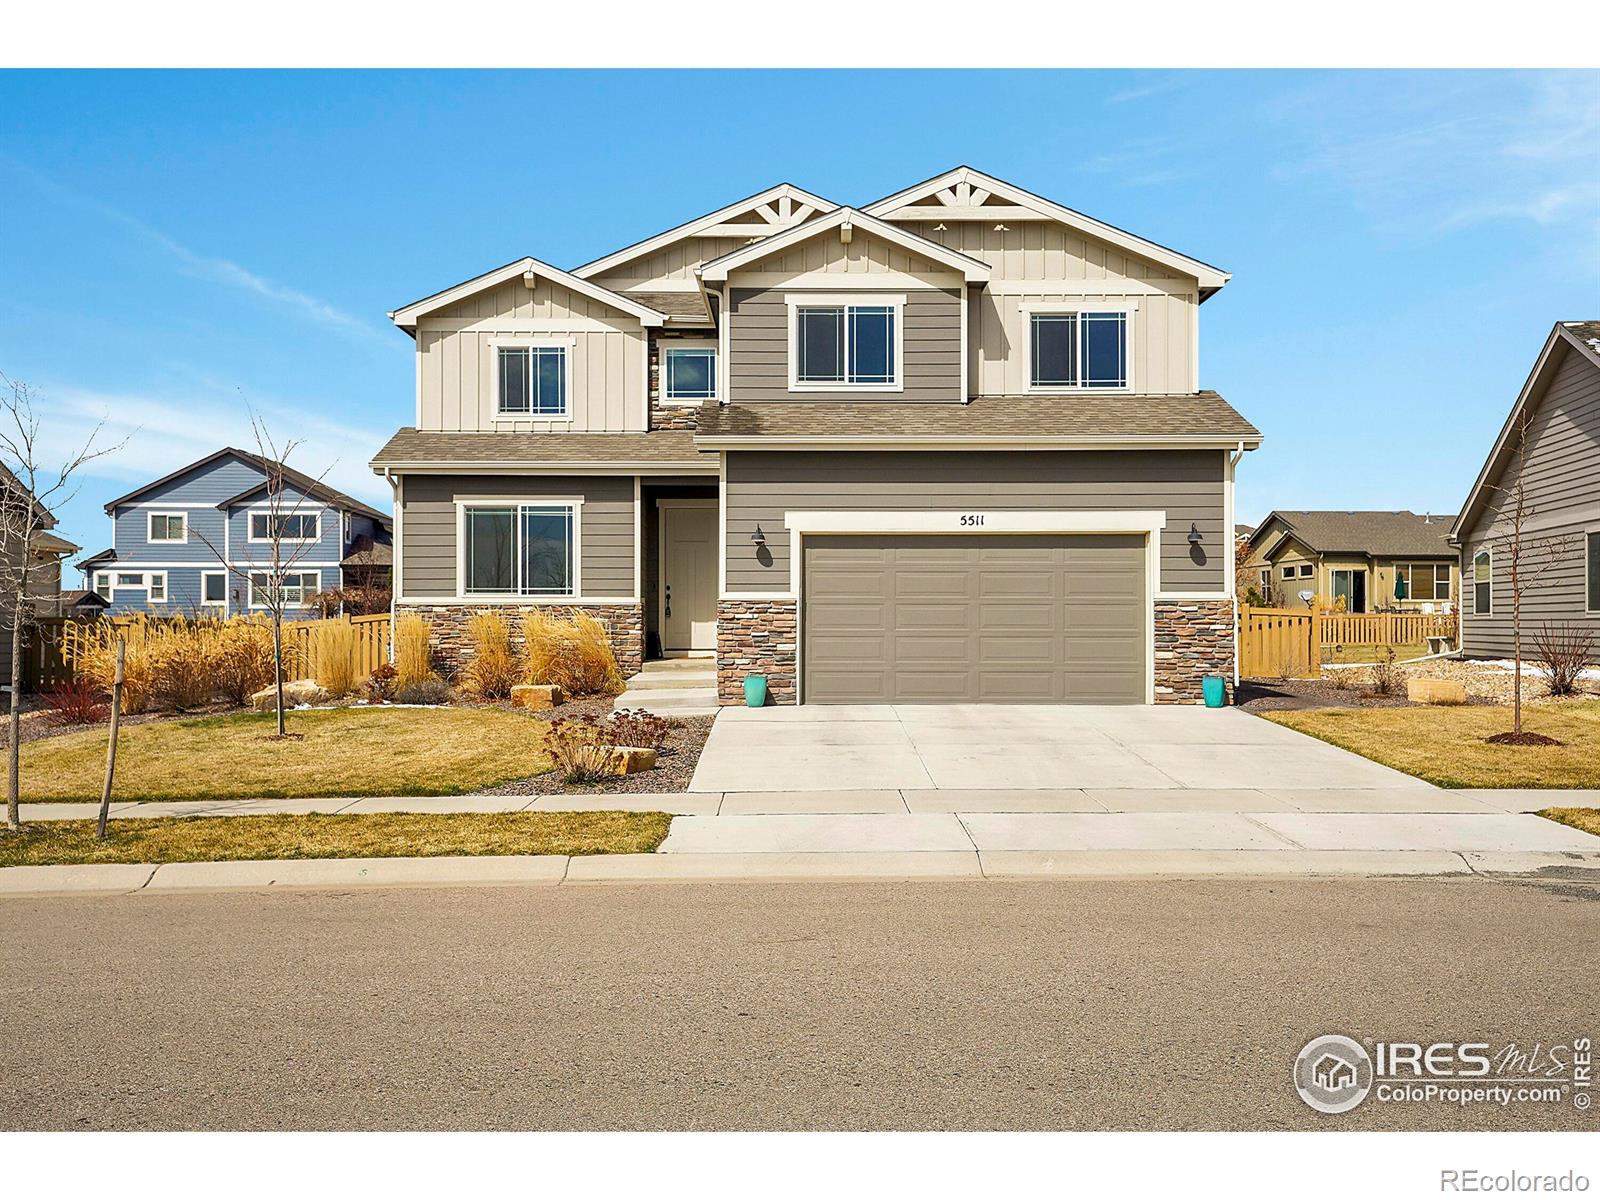 5511  long drive, Timnath sold home. Closed on 2024-04-26 for $663,000.